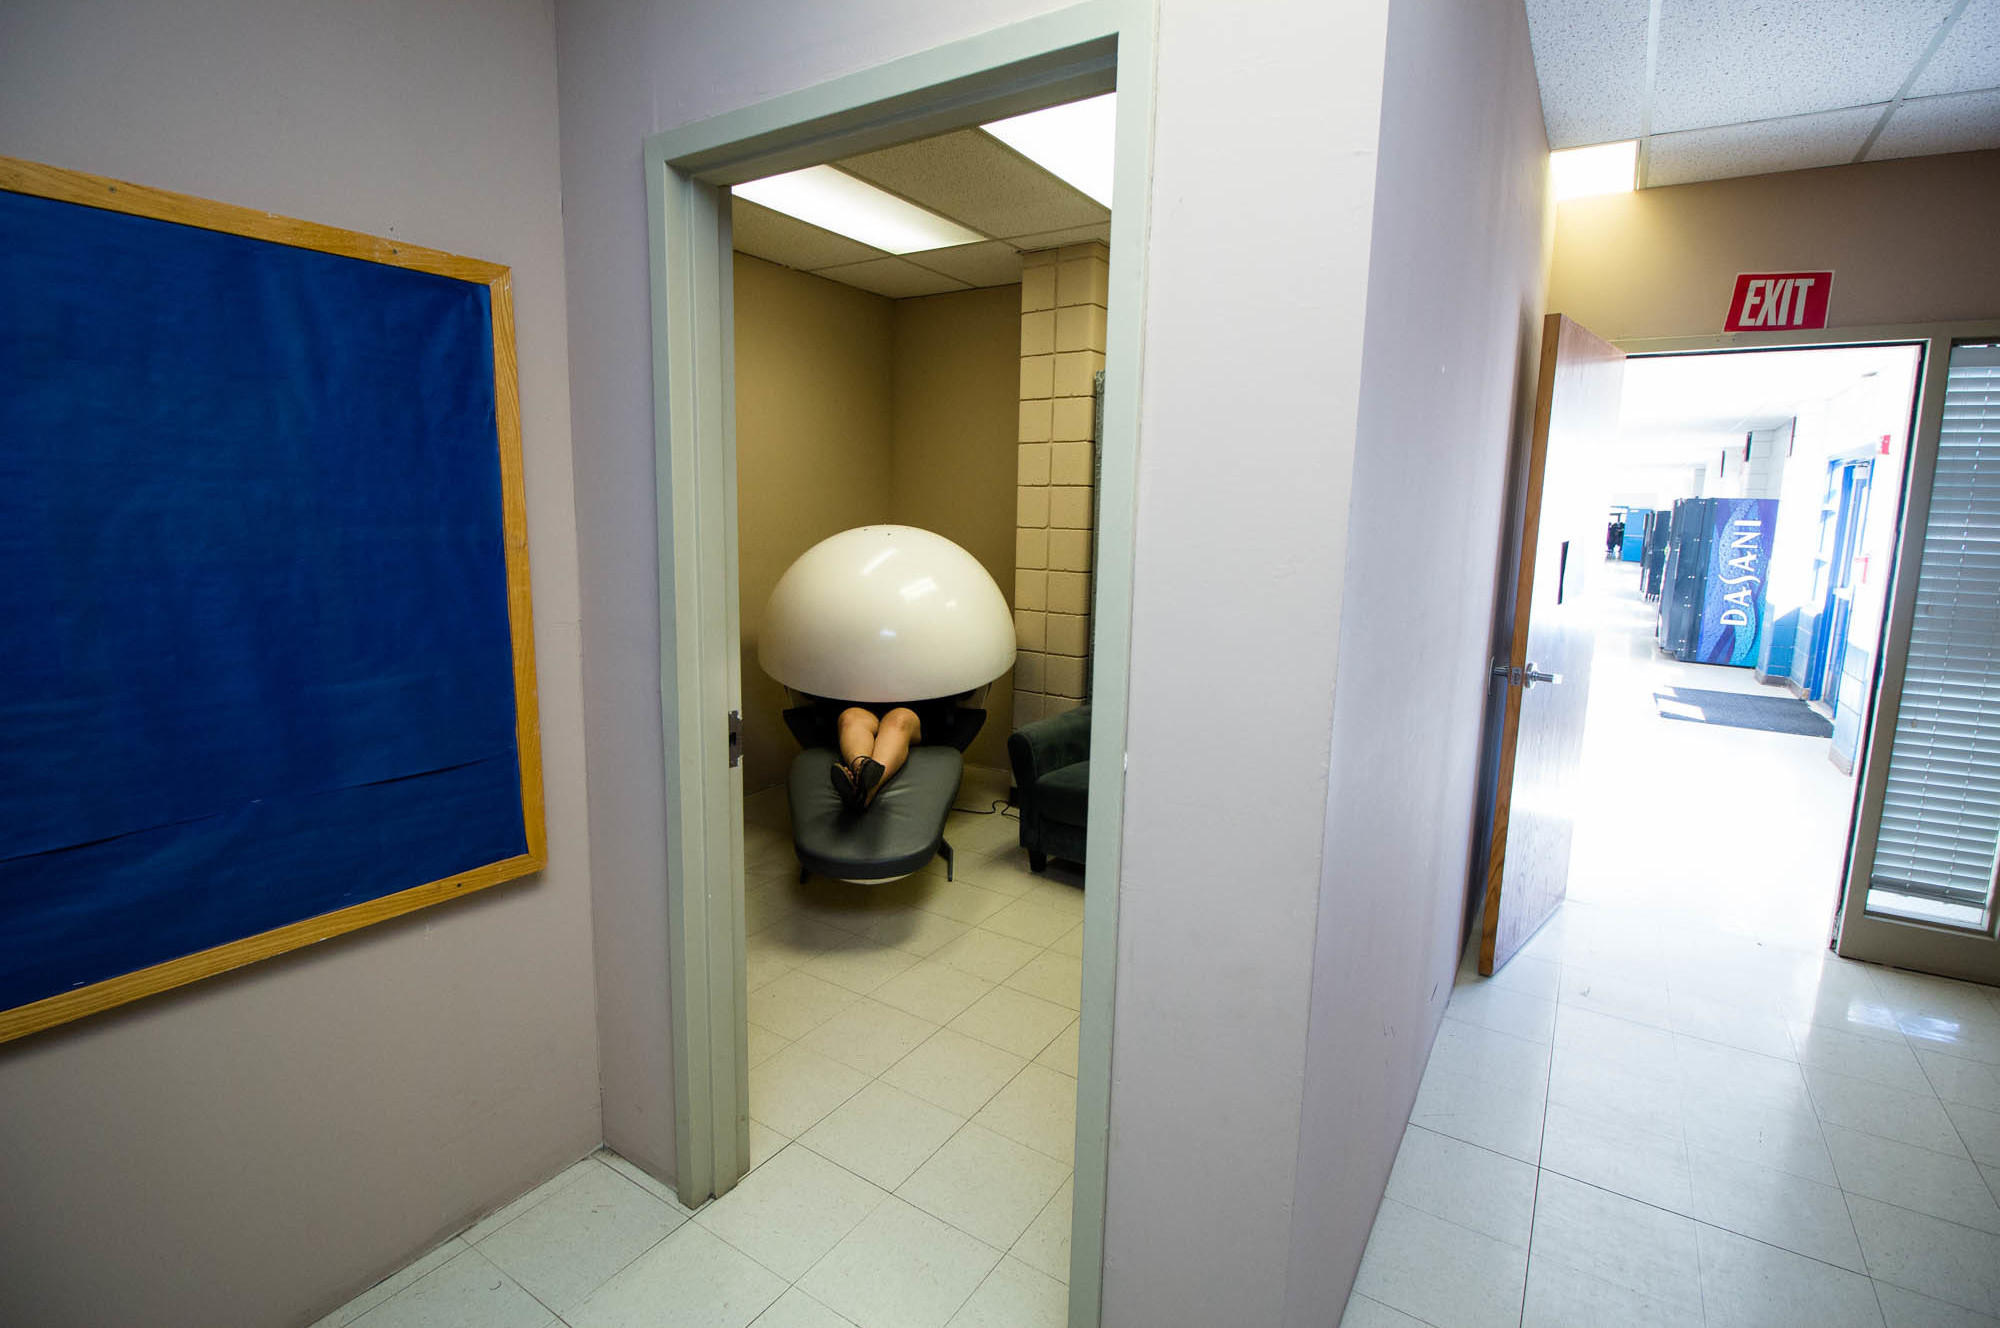 Las Cruces High School has one napping pod, which students use for 20 minutes when they are tired, stressed or angry.